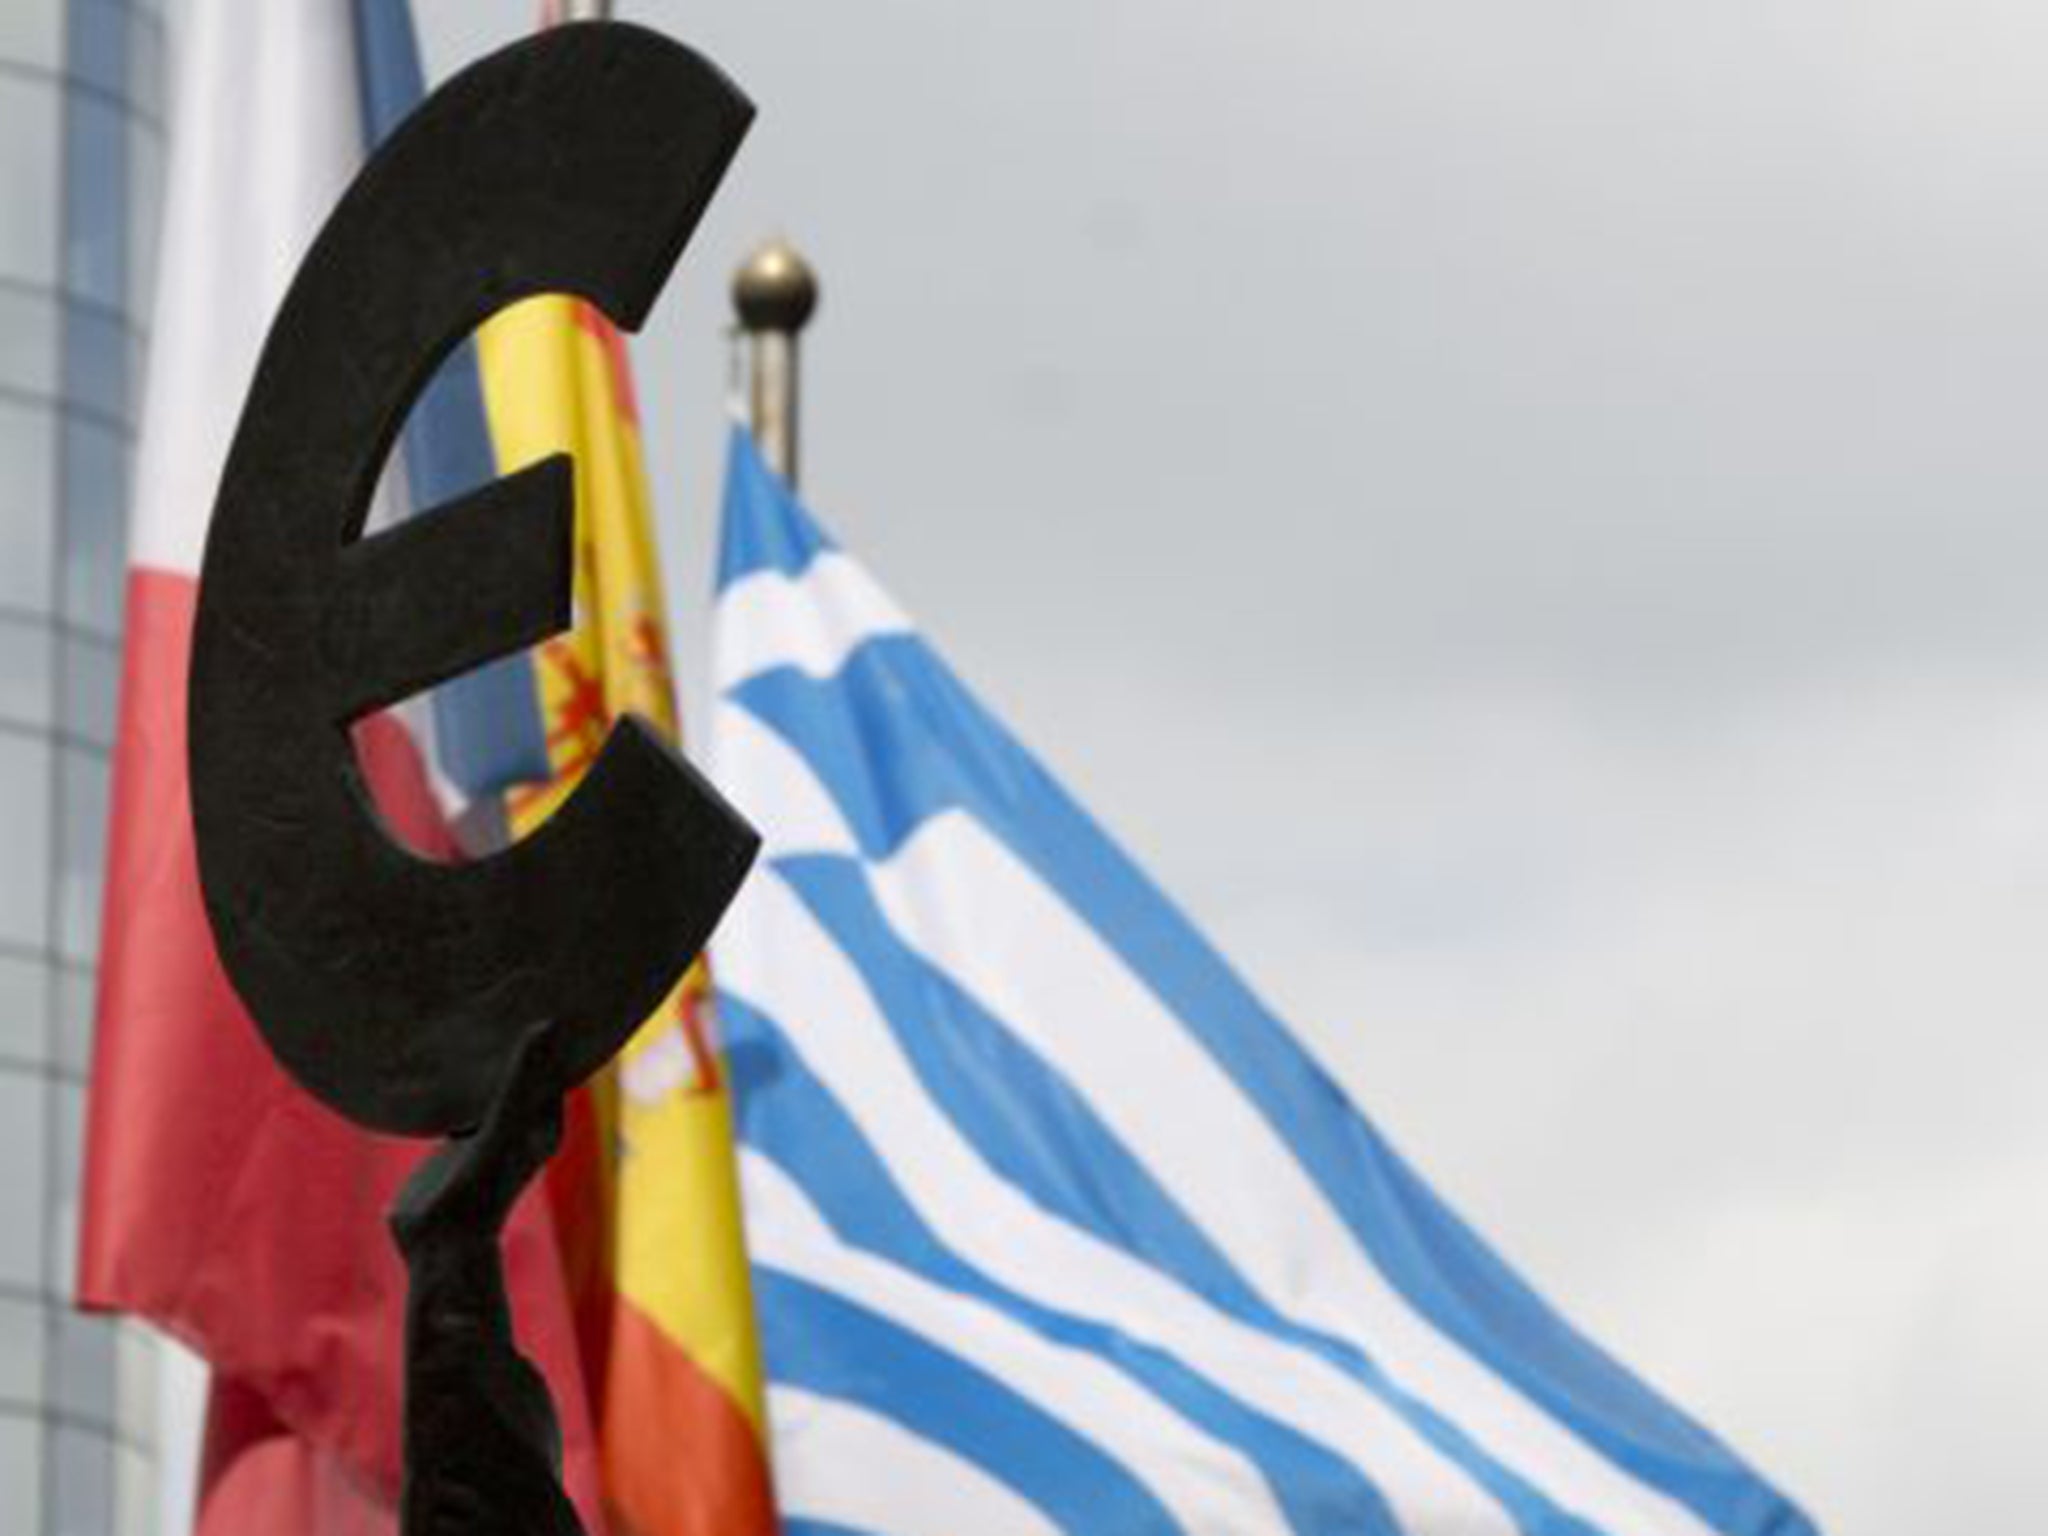 Greece must repay €1.6bn to the IMF on 30 June or find itself in a technical sovereign default